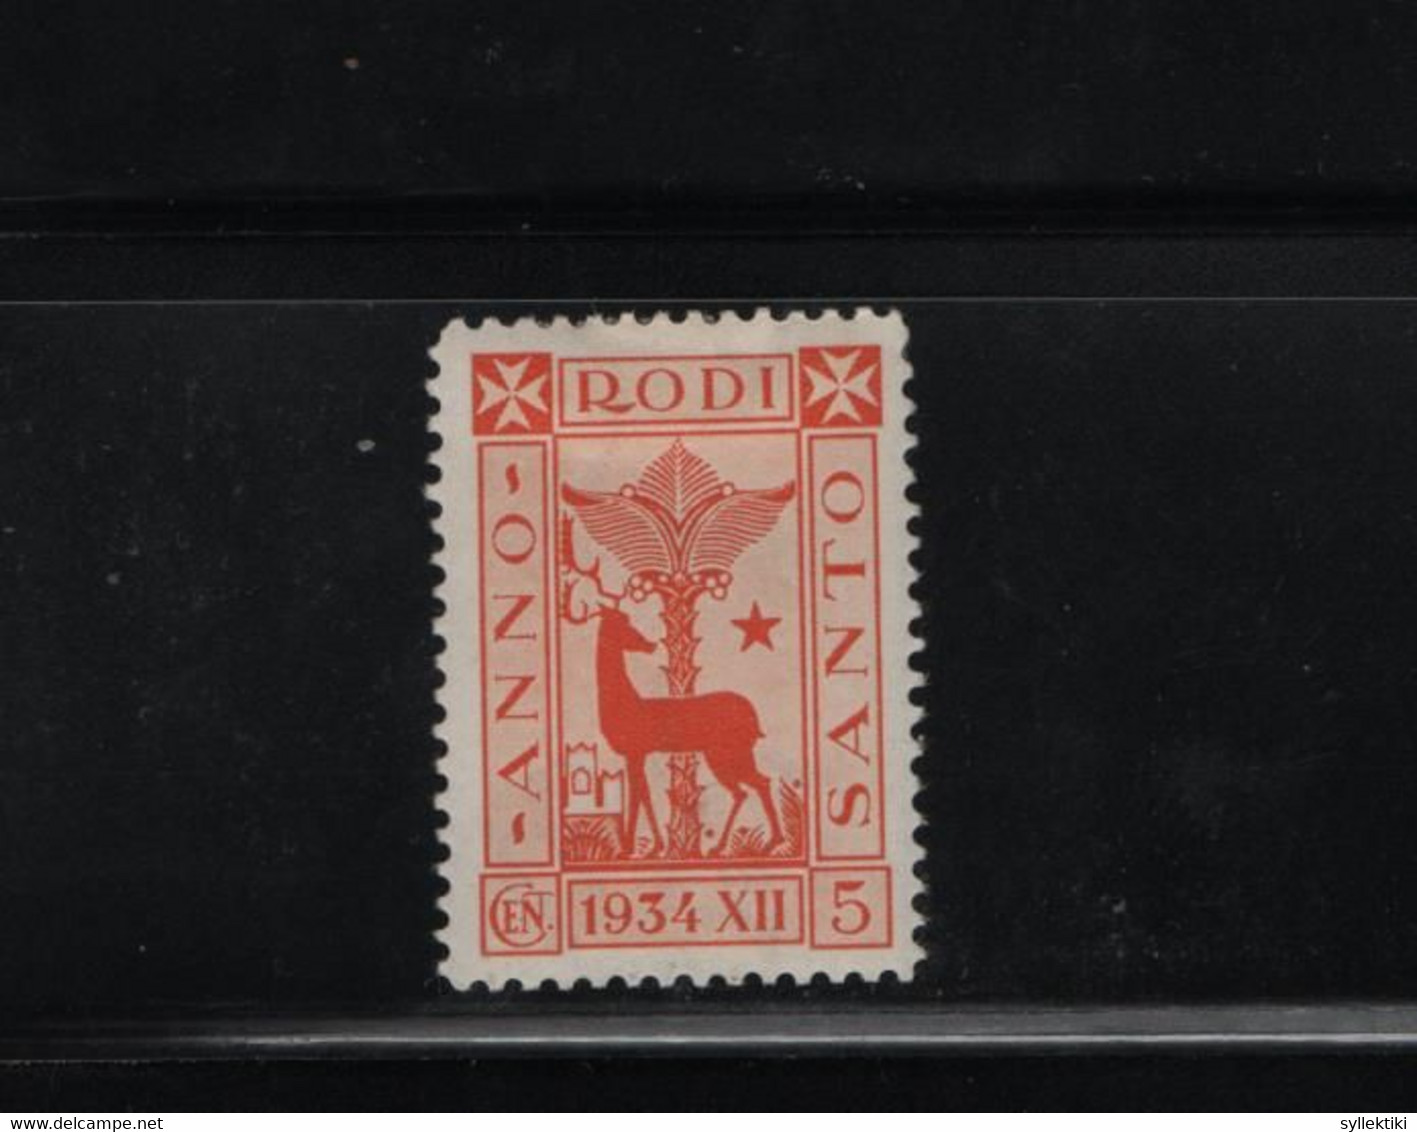 GREECE DODECANESE 1935 HOLY YEAR ISSUE 5 CENT MH STAMP    HELLAS No 144 AND VALUE EURO 25.00 - Dodecanese